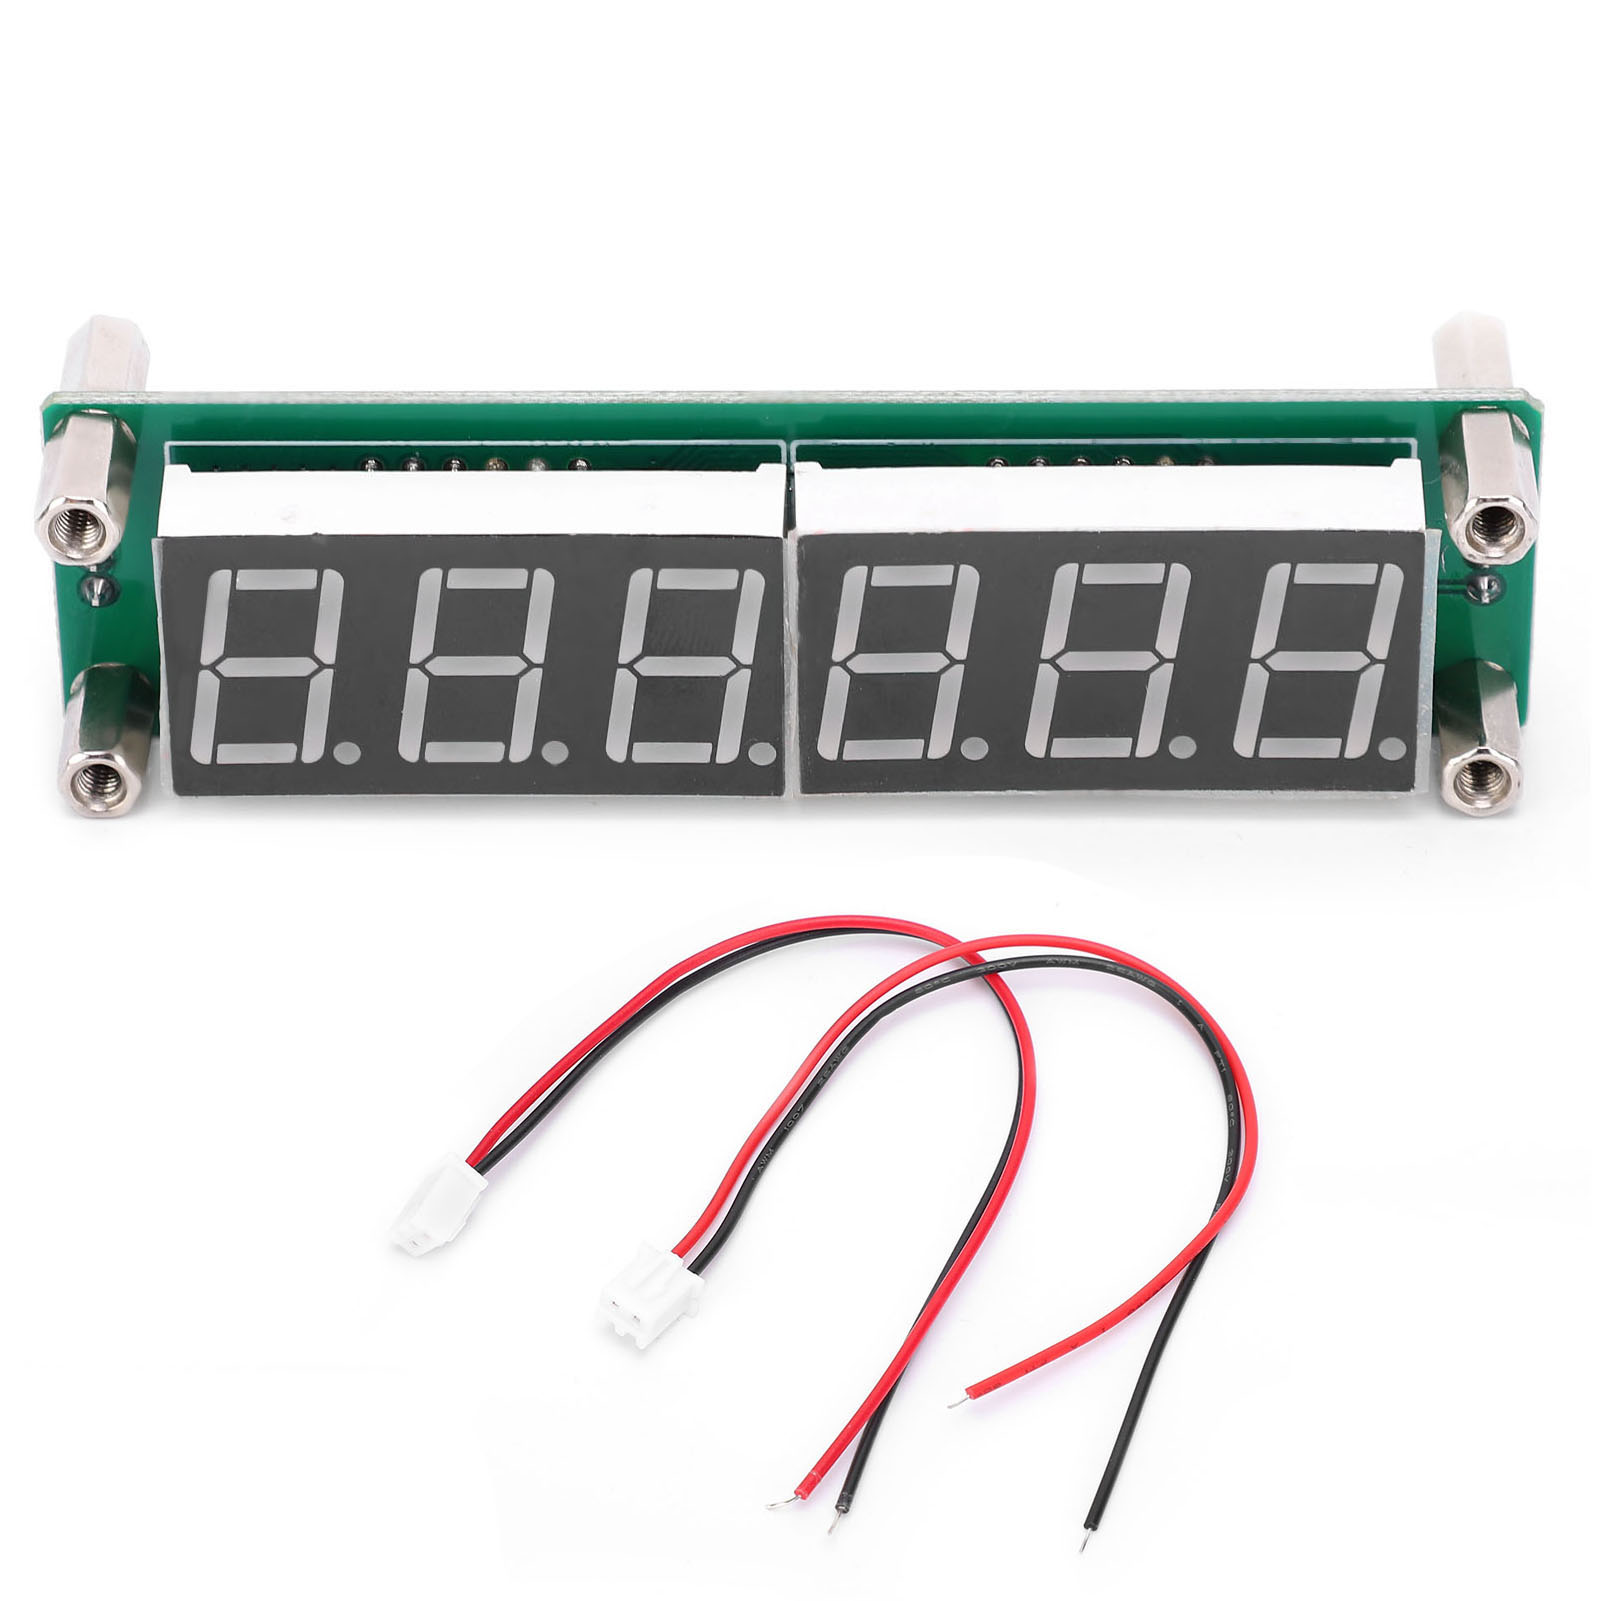 DC 8V~15V 6-digits Blue LED Display RF Signal Frequency Counter 0.1MHz~65MHz